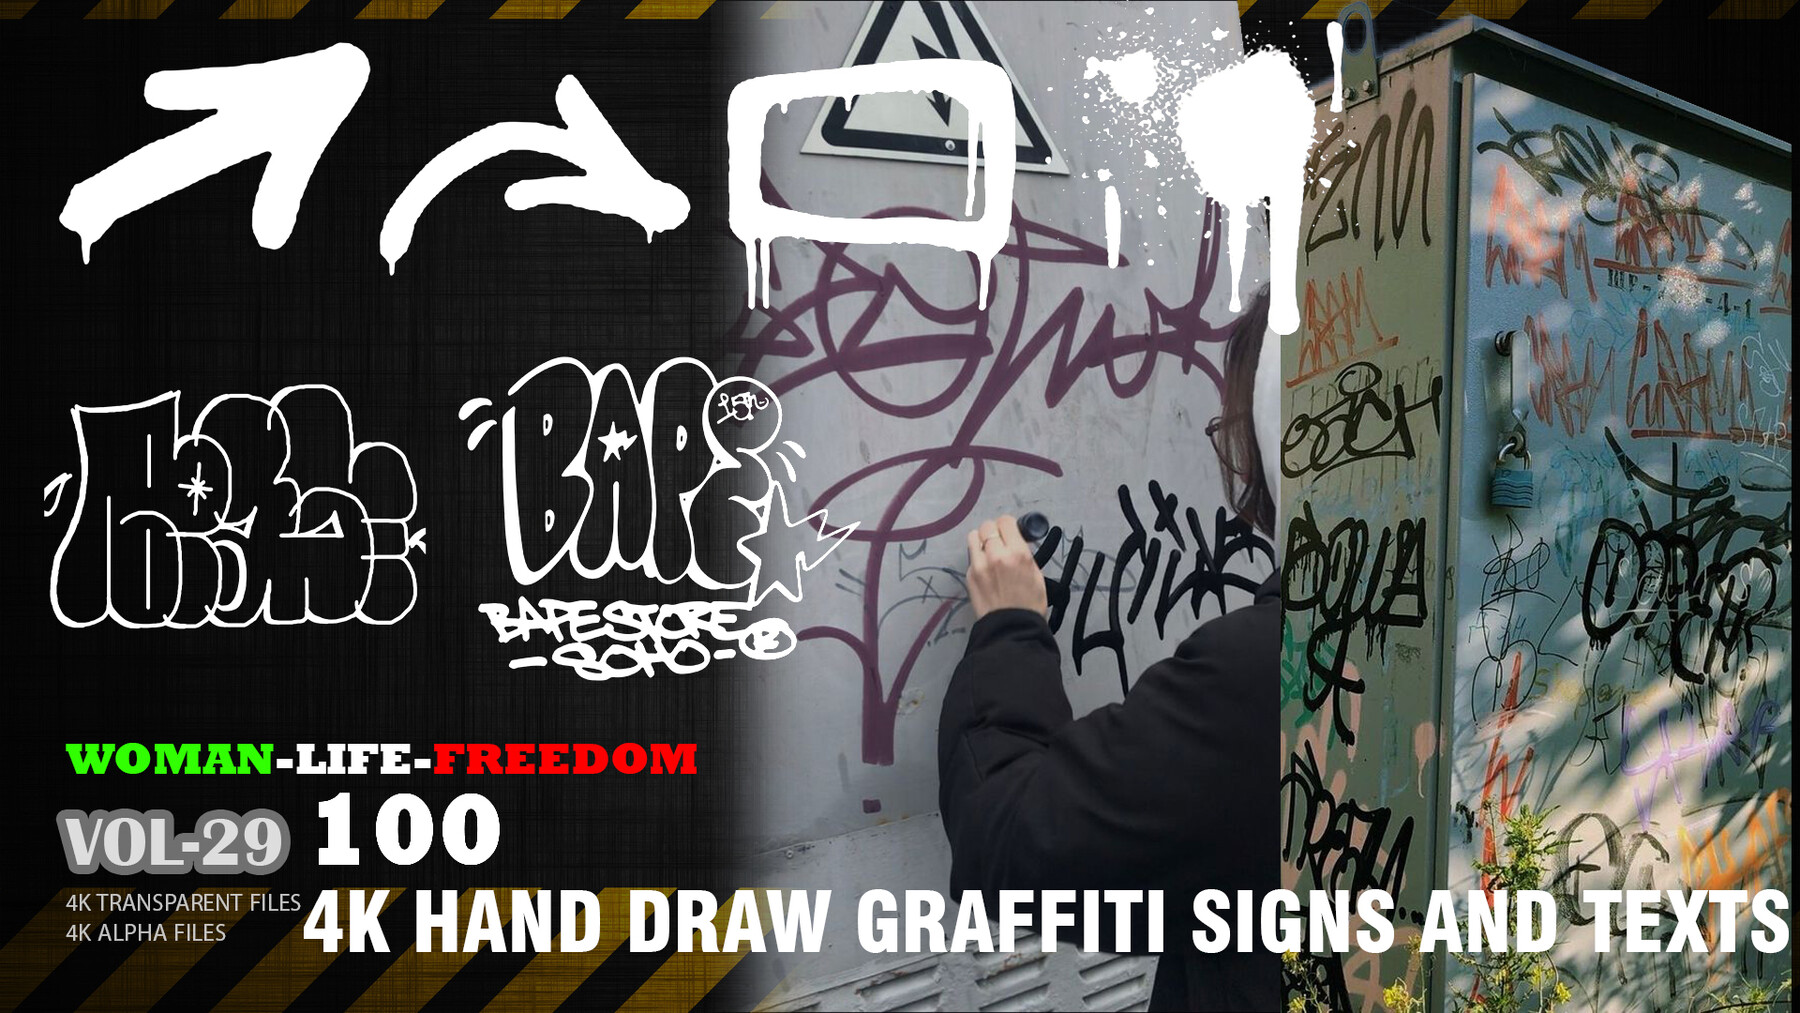 how to draw graffiti hands